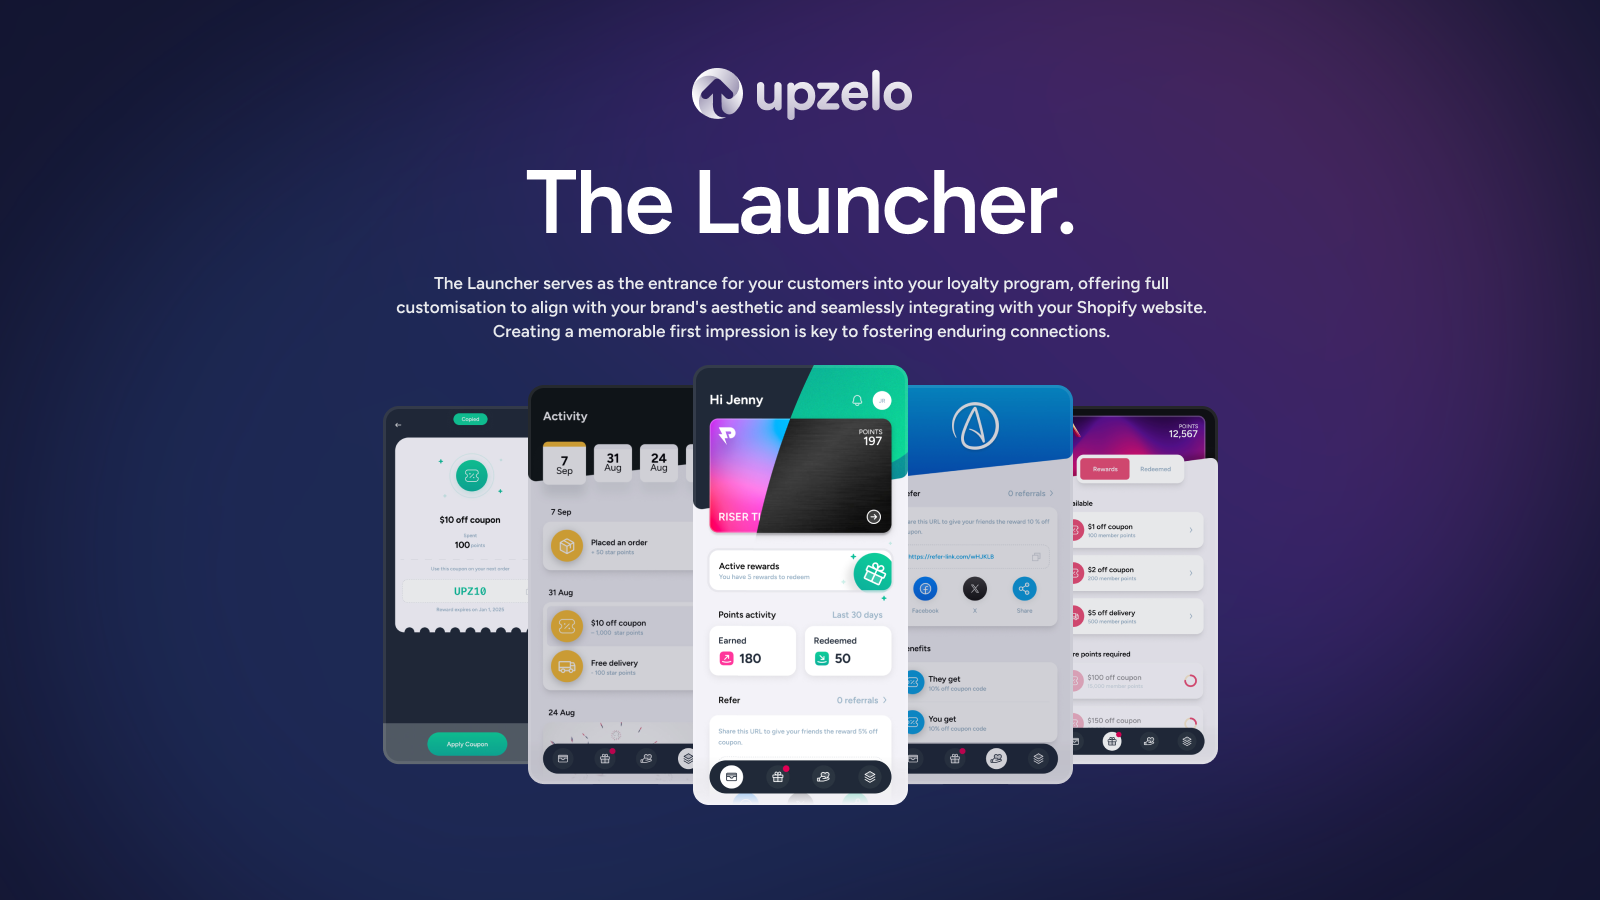 The Launcher. The Launcher serves as the entrance for your customers into your loyalty program, offering full customisation to align with your brand's aesthetic and seamlessly integrating with your Shopify website.